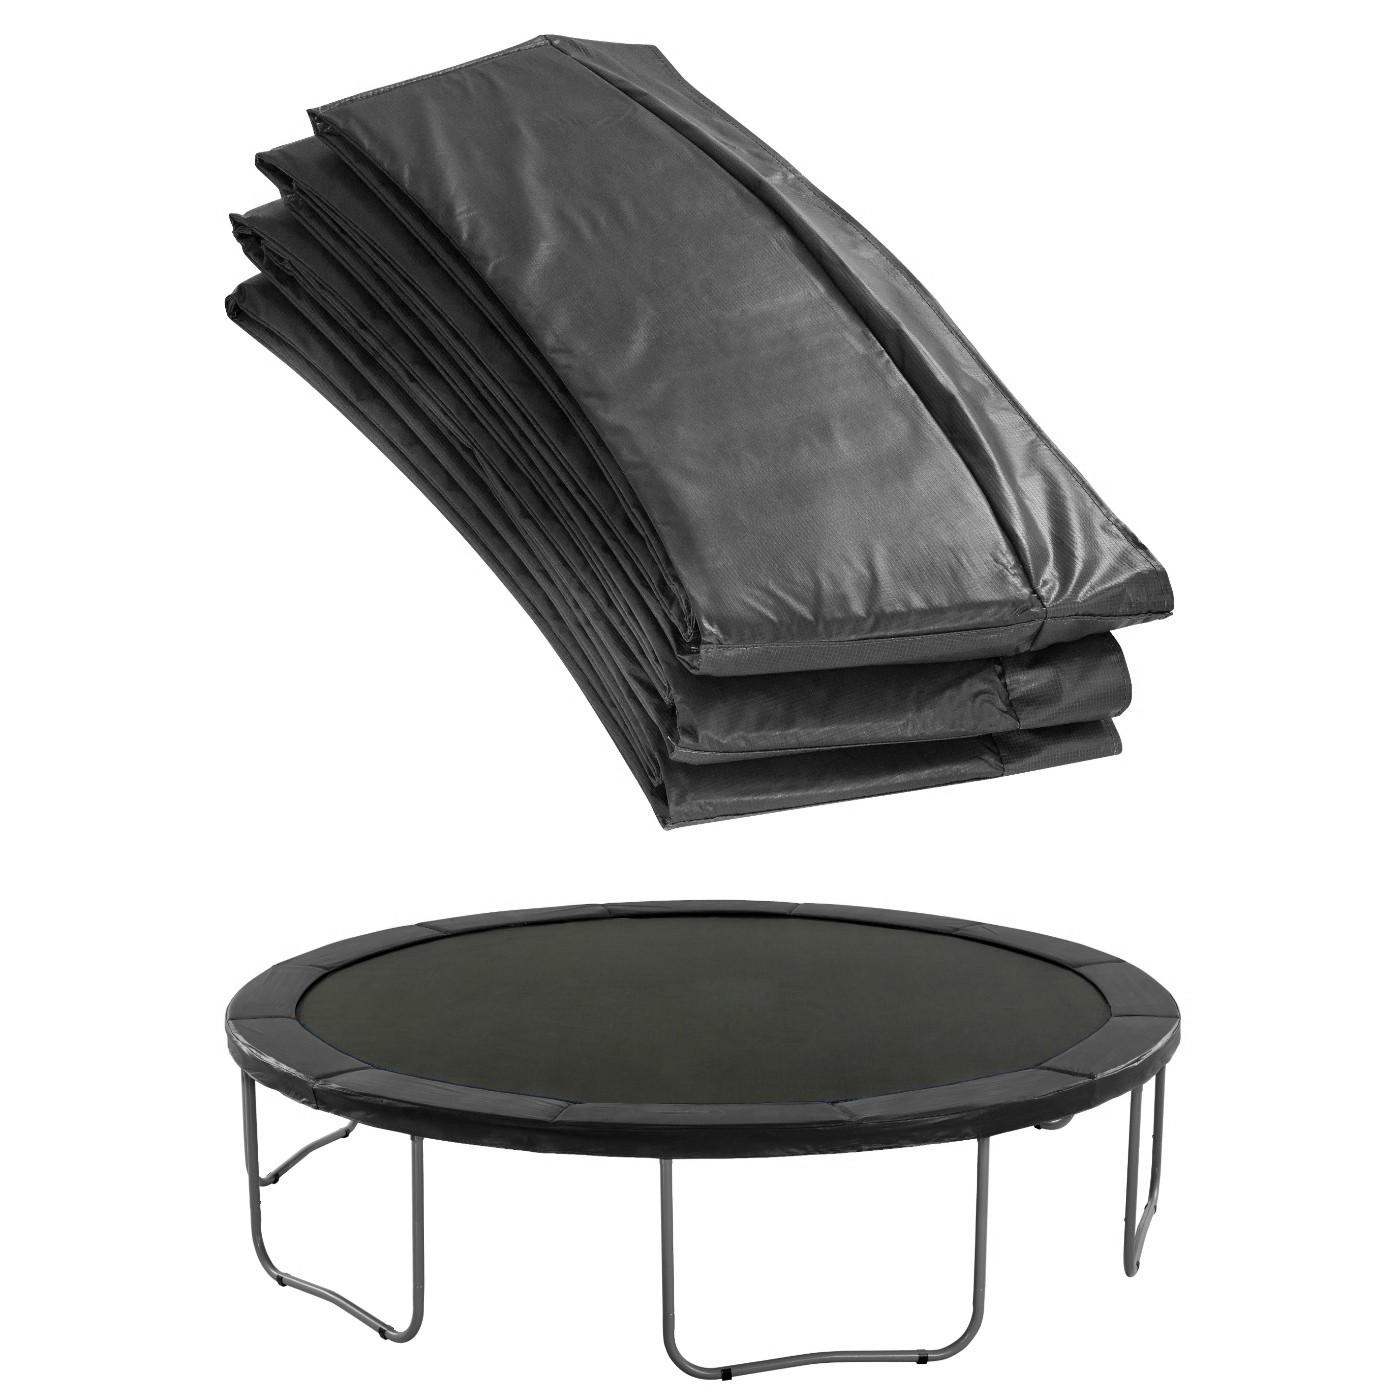 Moxie Super Spring Cover - Safety Pad for 457cm 15ft Round Trampoline Frame | Black